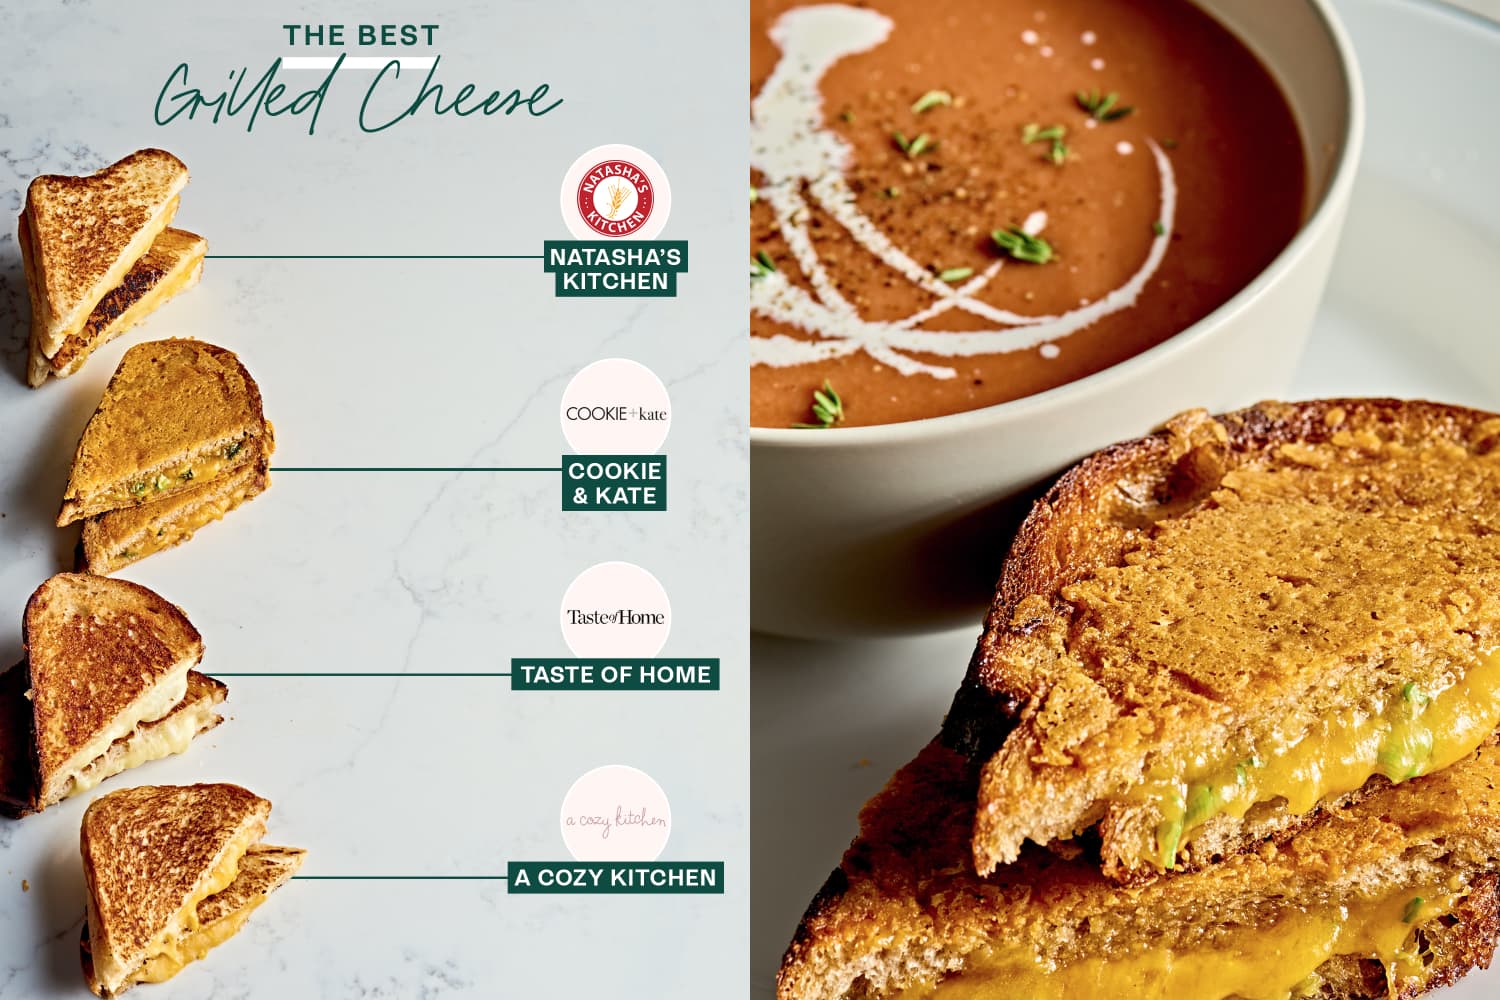 I Tried 4 Popular Grilled Cheese Recipes and the Winner Is Perfection